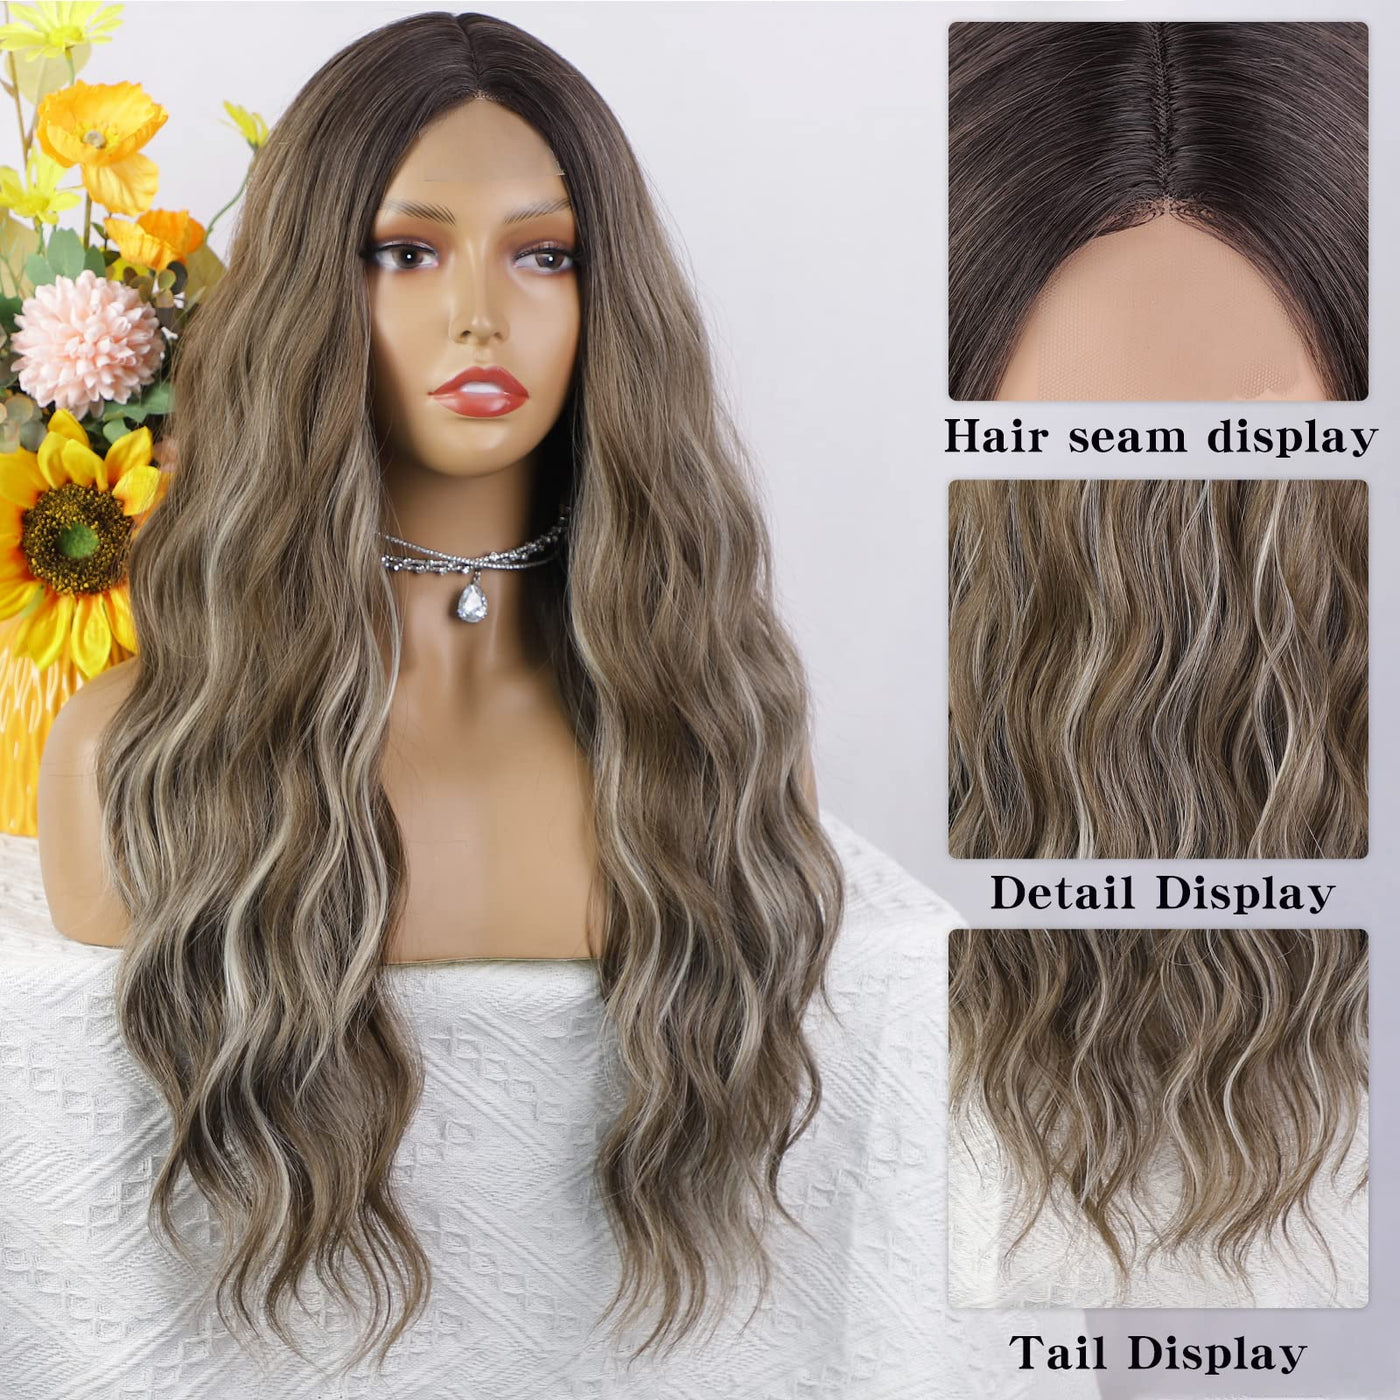 CloudEase Long Wigs for Women Wavy Ombre Wig Middle Part Ash Brown and Bleach Blonde Curly Wigs Natural Looking Hair Replacement Wigs for Party Daily Use